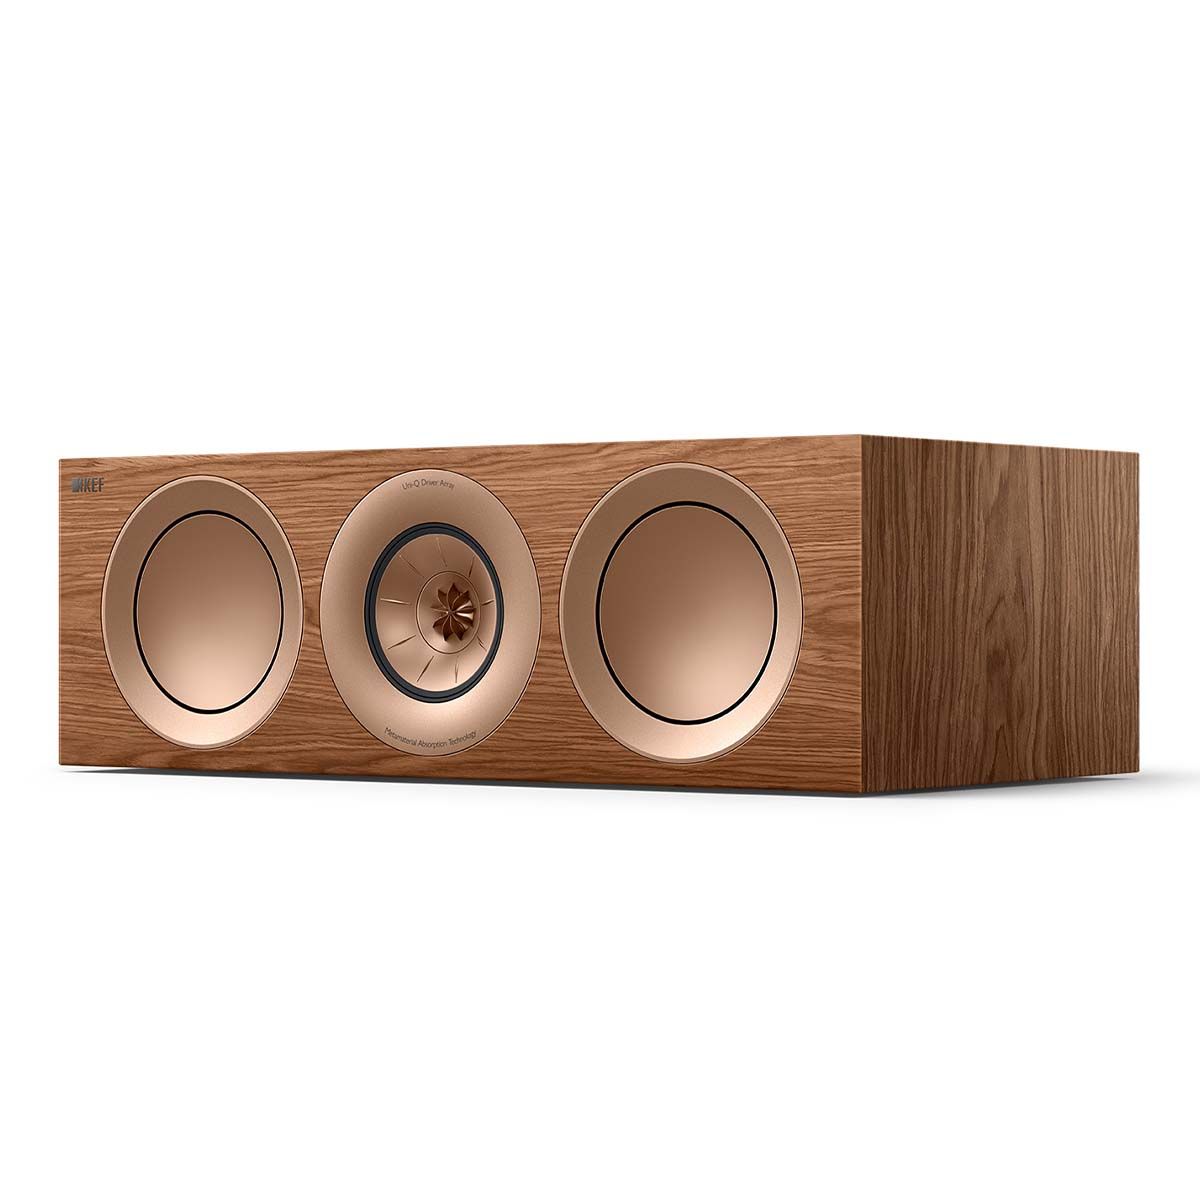 KEF R6 Meta LCR Speaker - Each walnut angled front view without grille